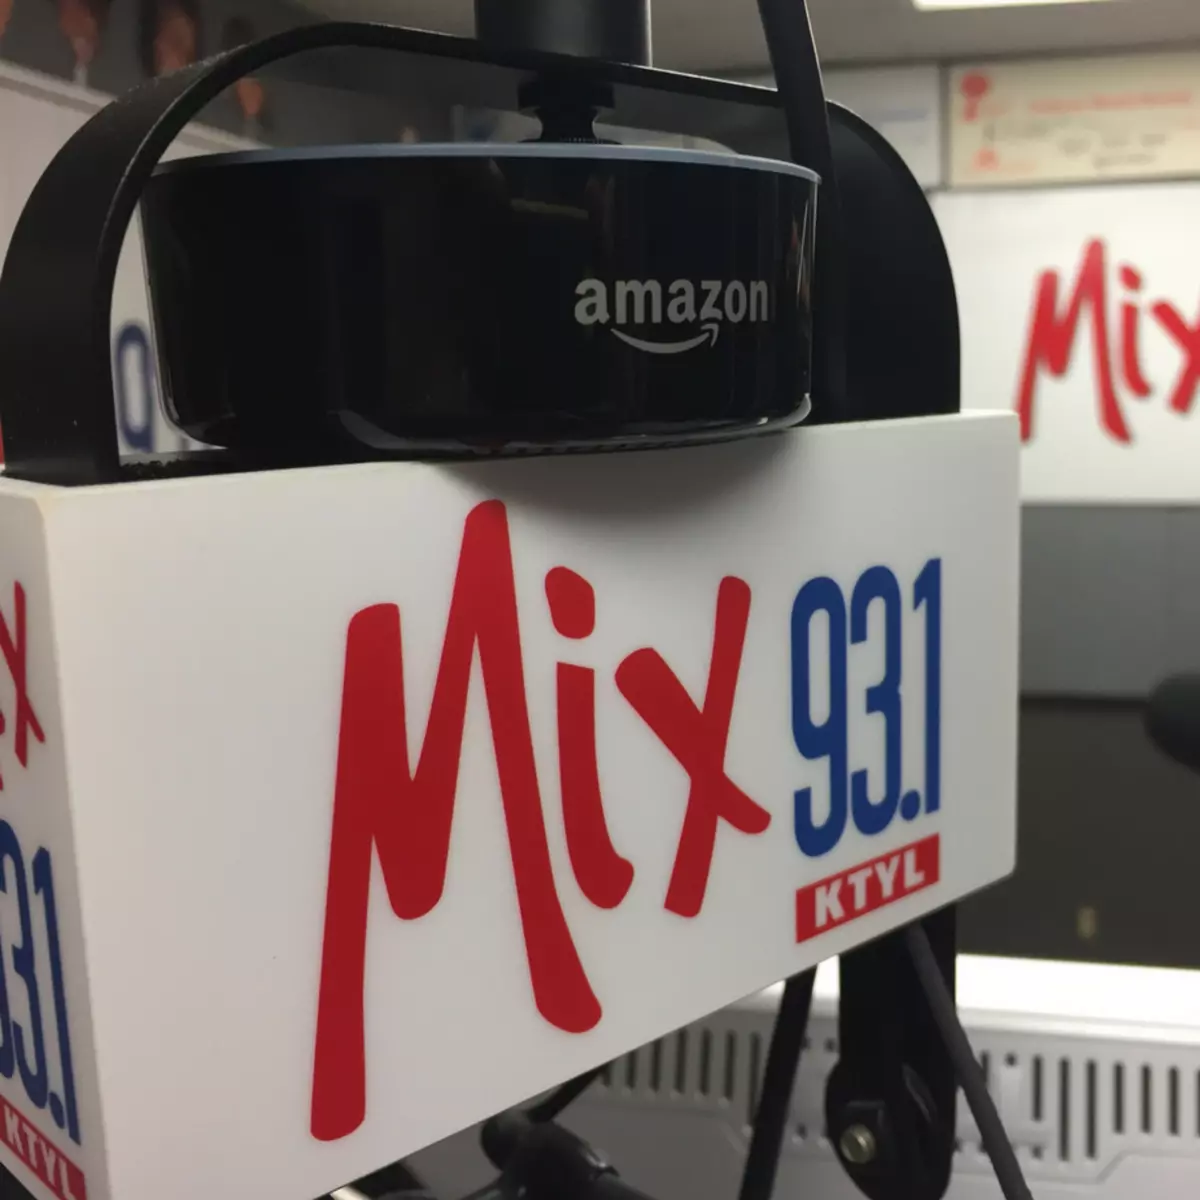 Mix 93-1 Is Now On Your Amazon Alexa Enabled Devices